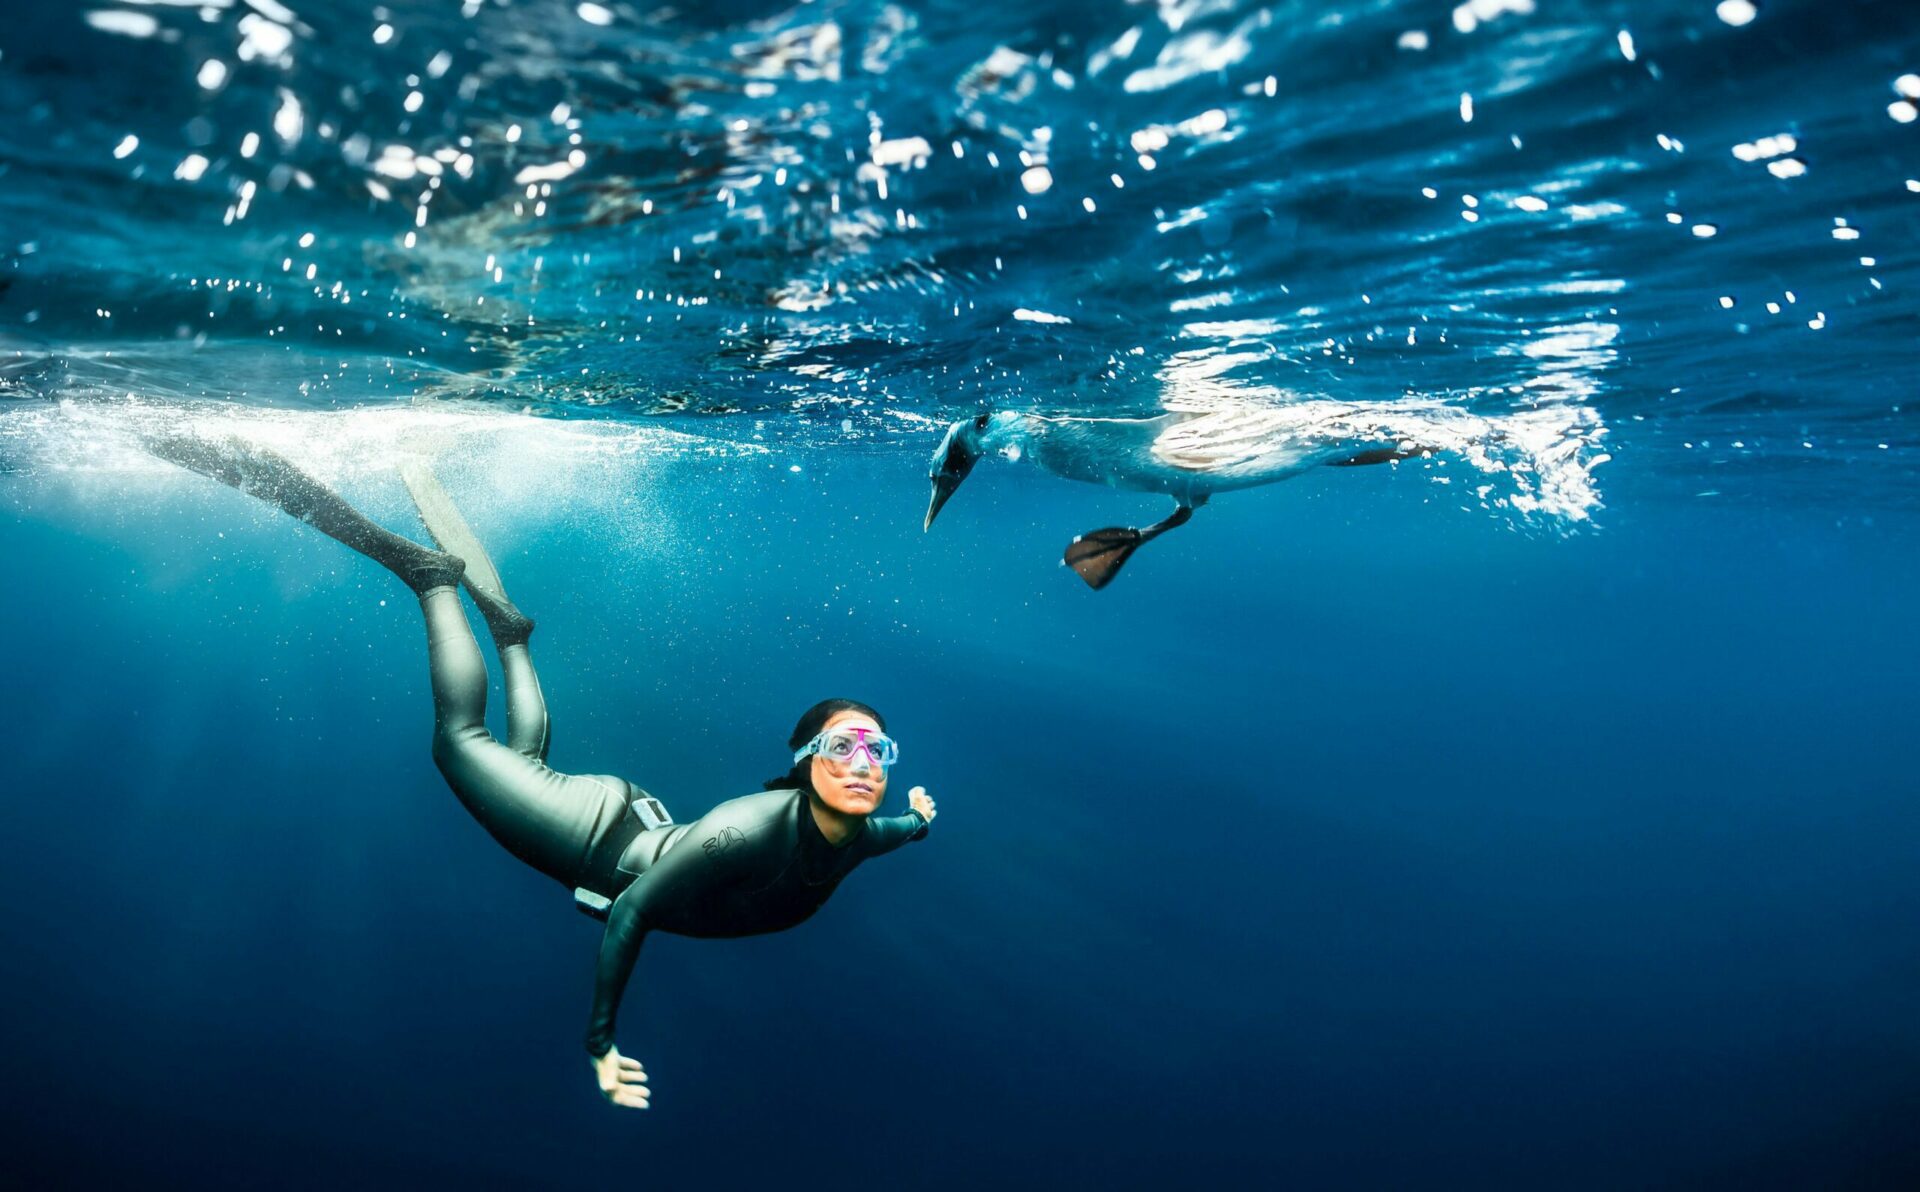 woman freediver beneath the water looking up at a penguin who's head has dipped below the water